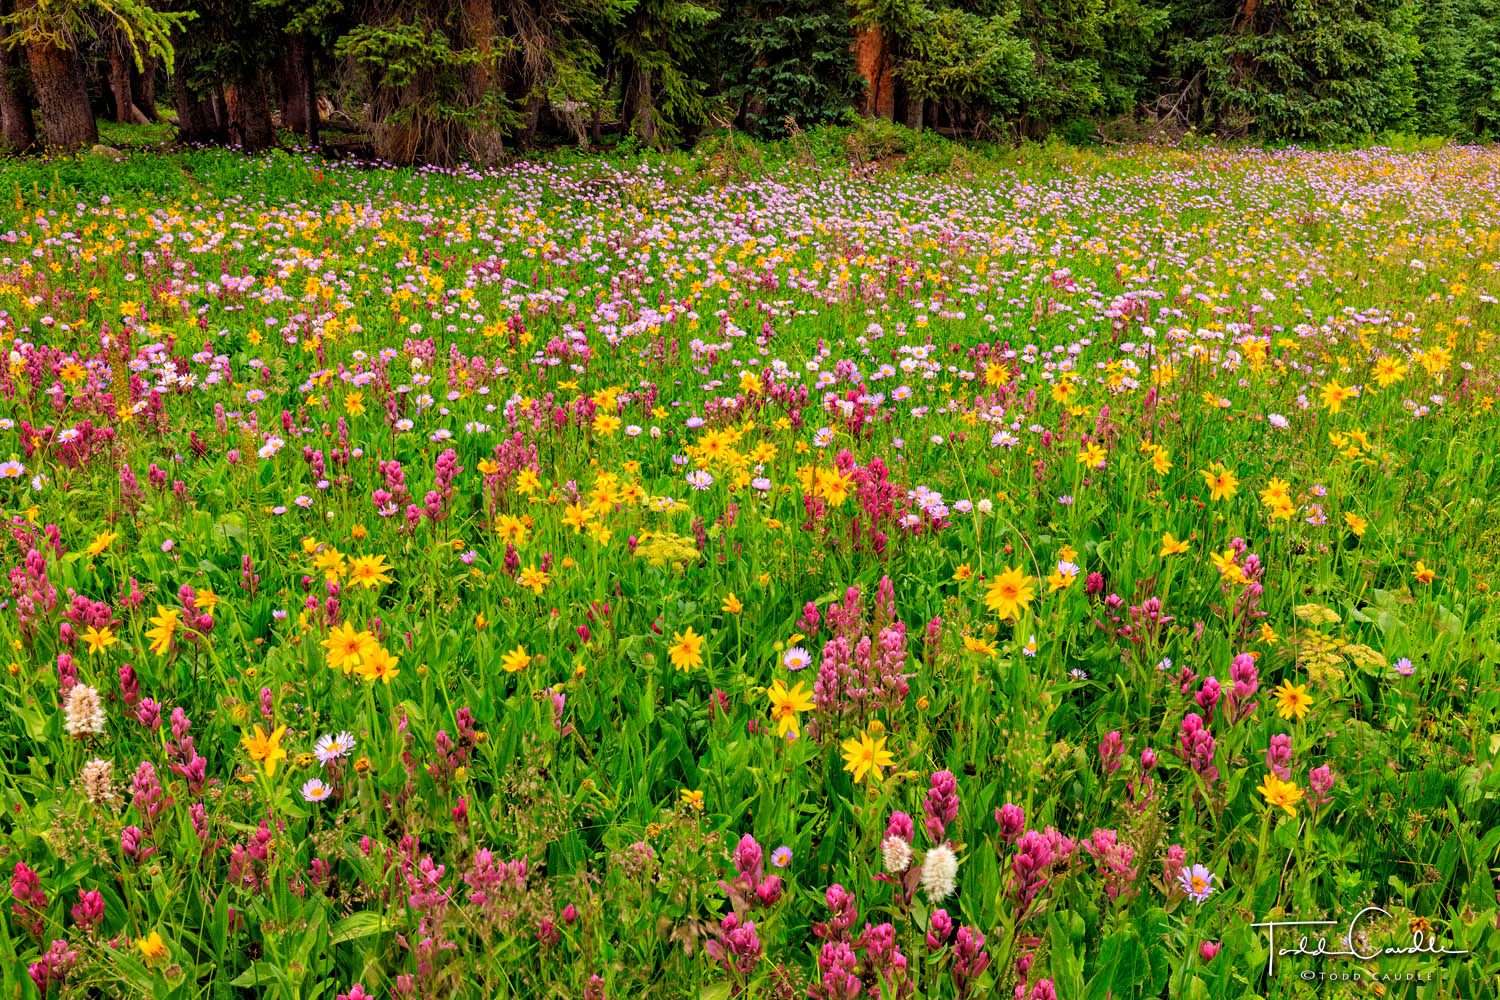 A wide variety of wildflowers fills meadows in the Gore Range.